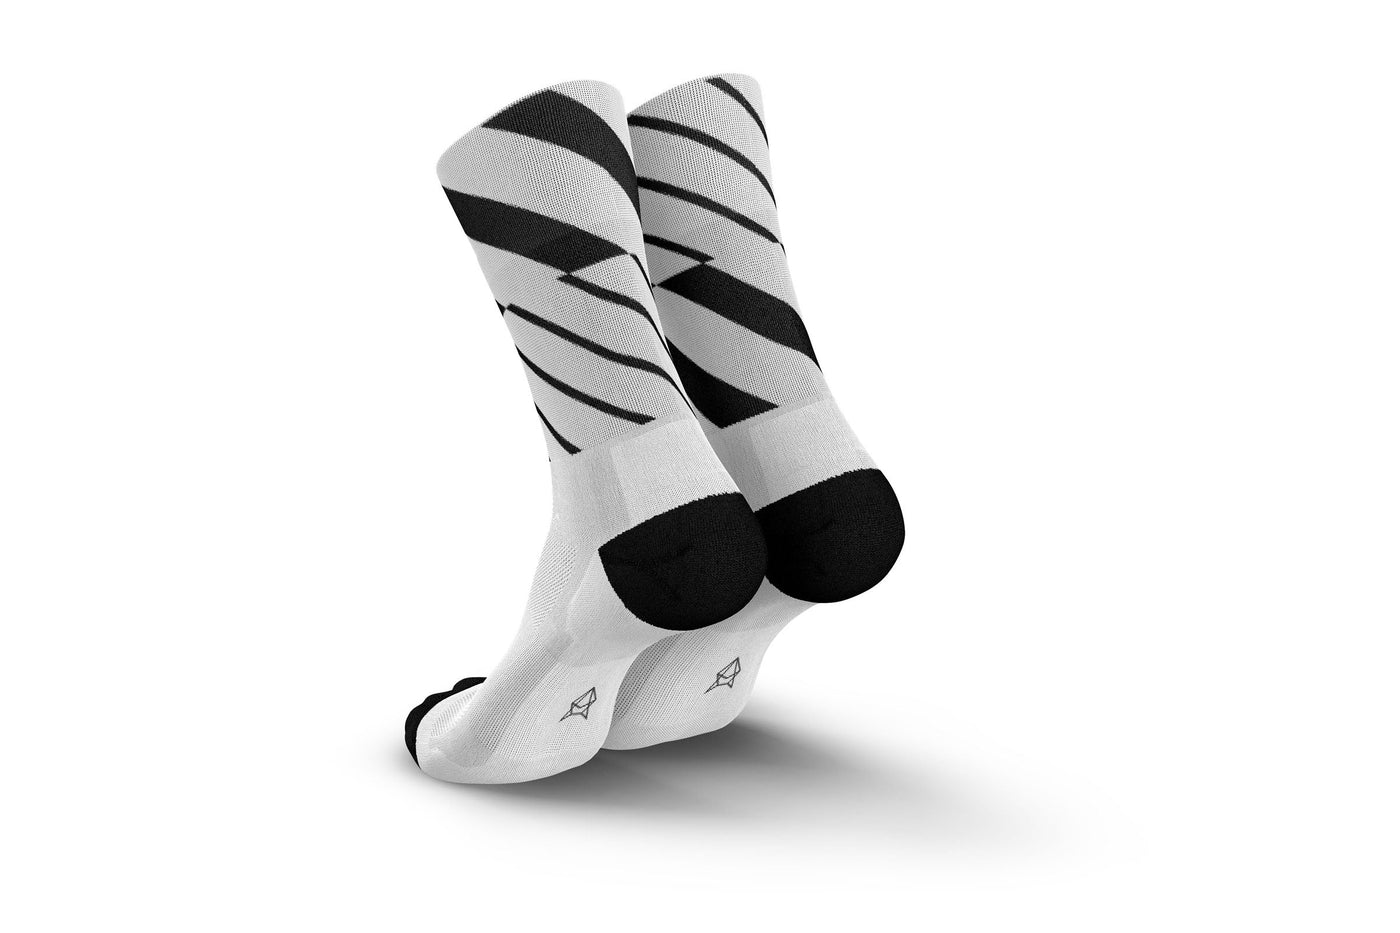 Incylence Ultralight Angles White Socks (chaussettes blanches ultralégères)